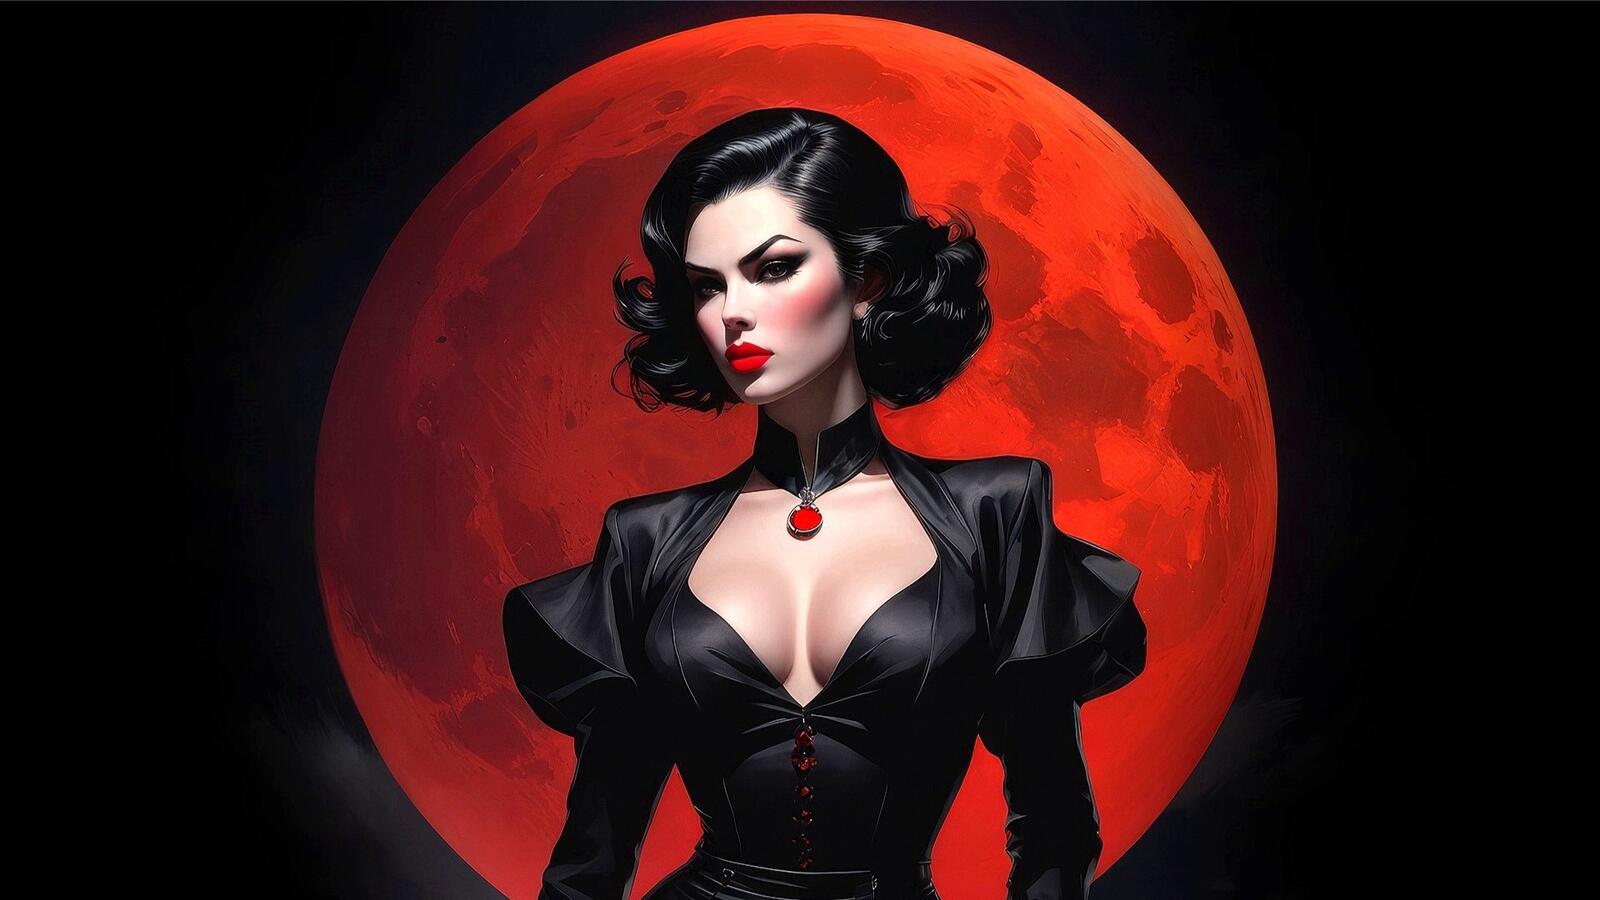 Free photo The vampire girl against the red moon.